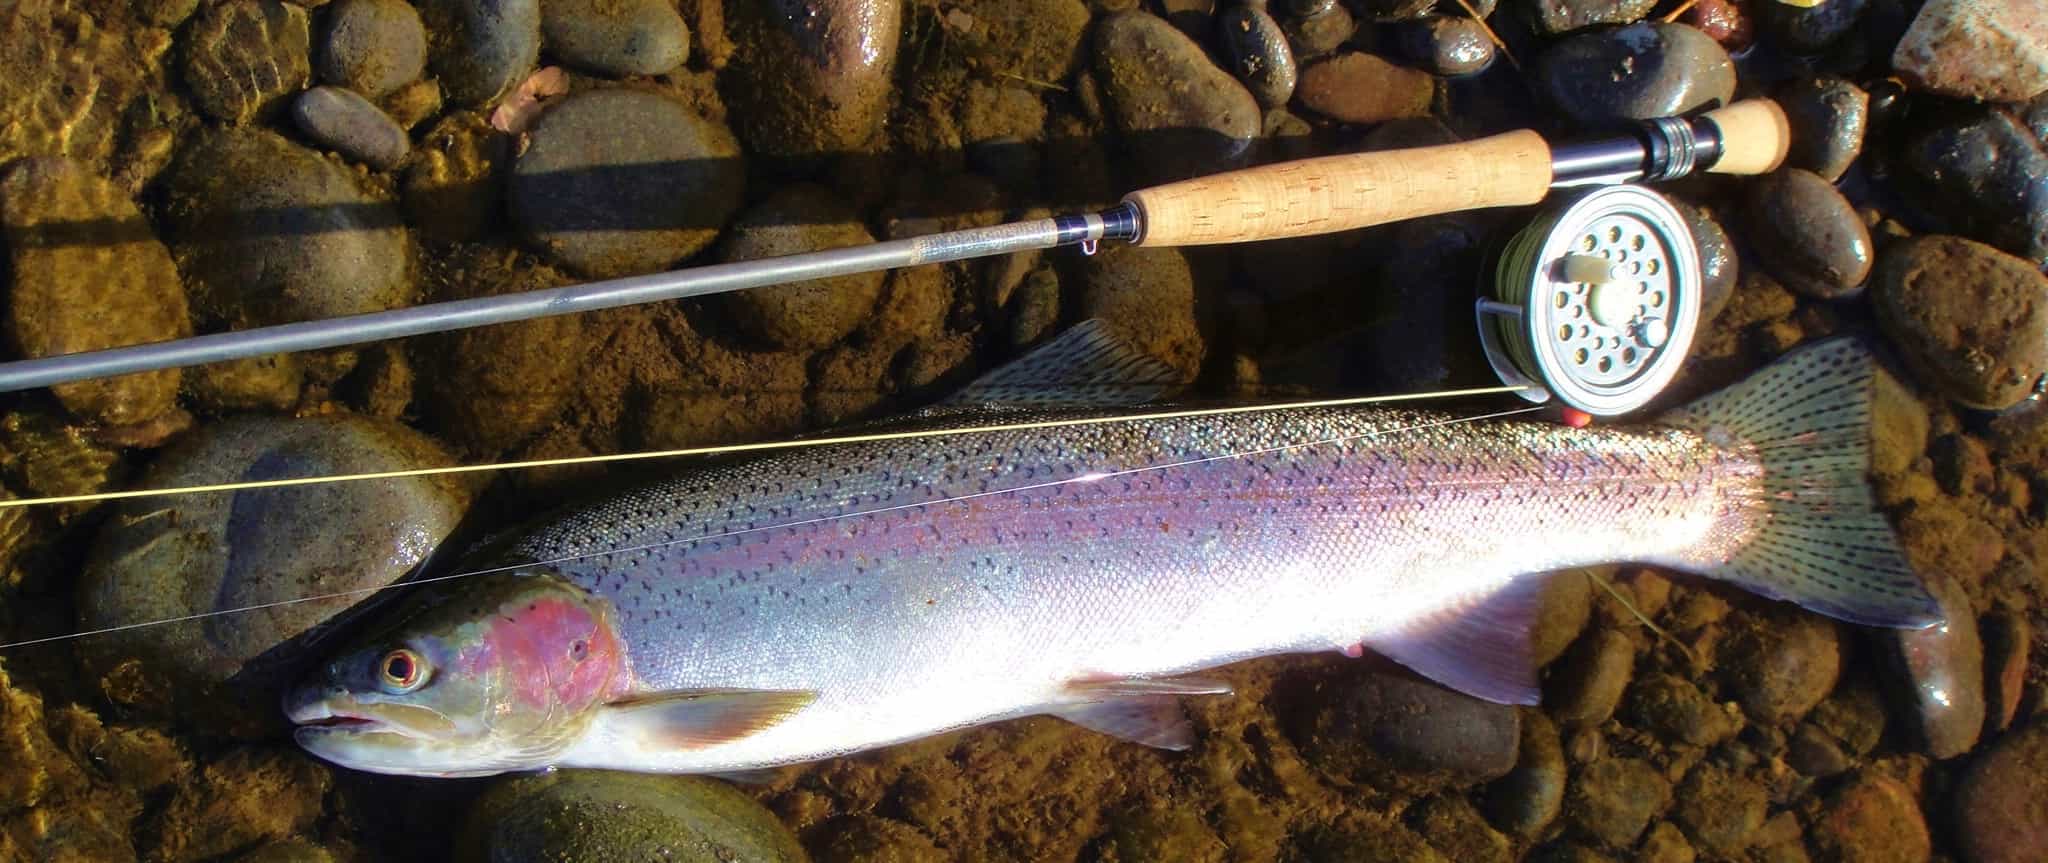 Fly fishing rod and reel with a Rogue river, Oregon summer steelhead.